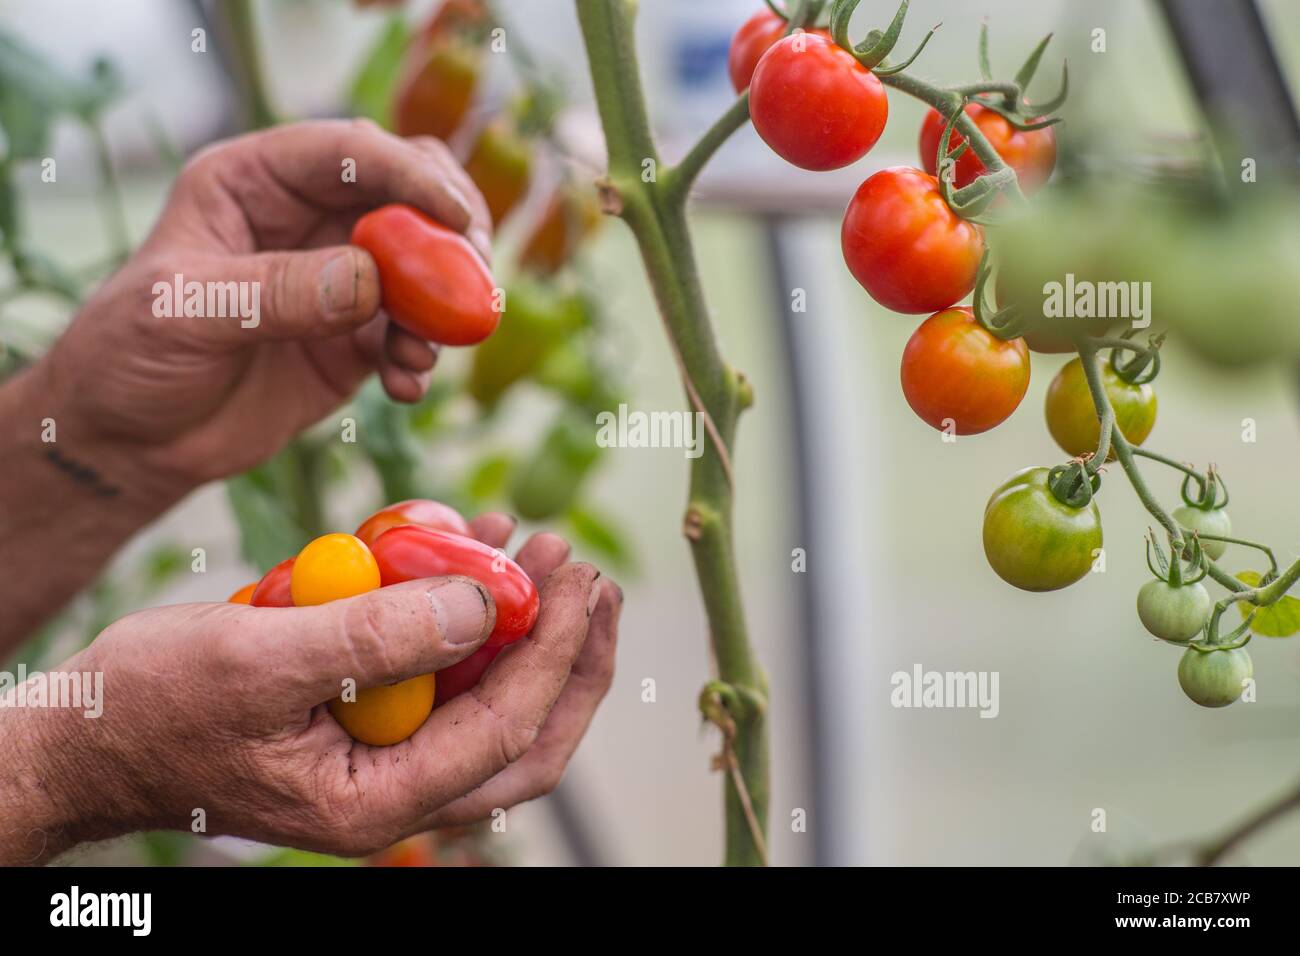 Close up of hands harvesting various assorted cherry tomatoes Stock Photo